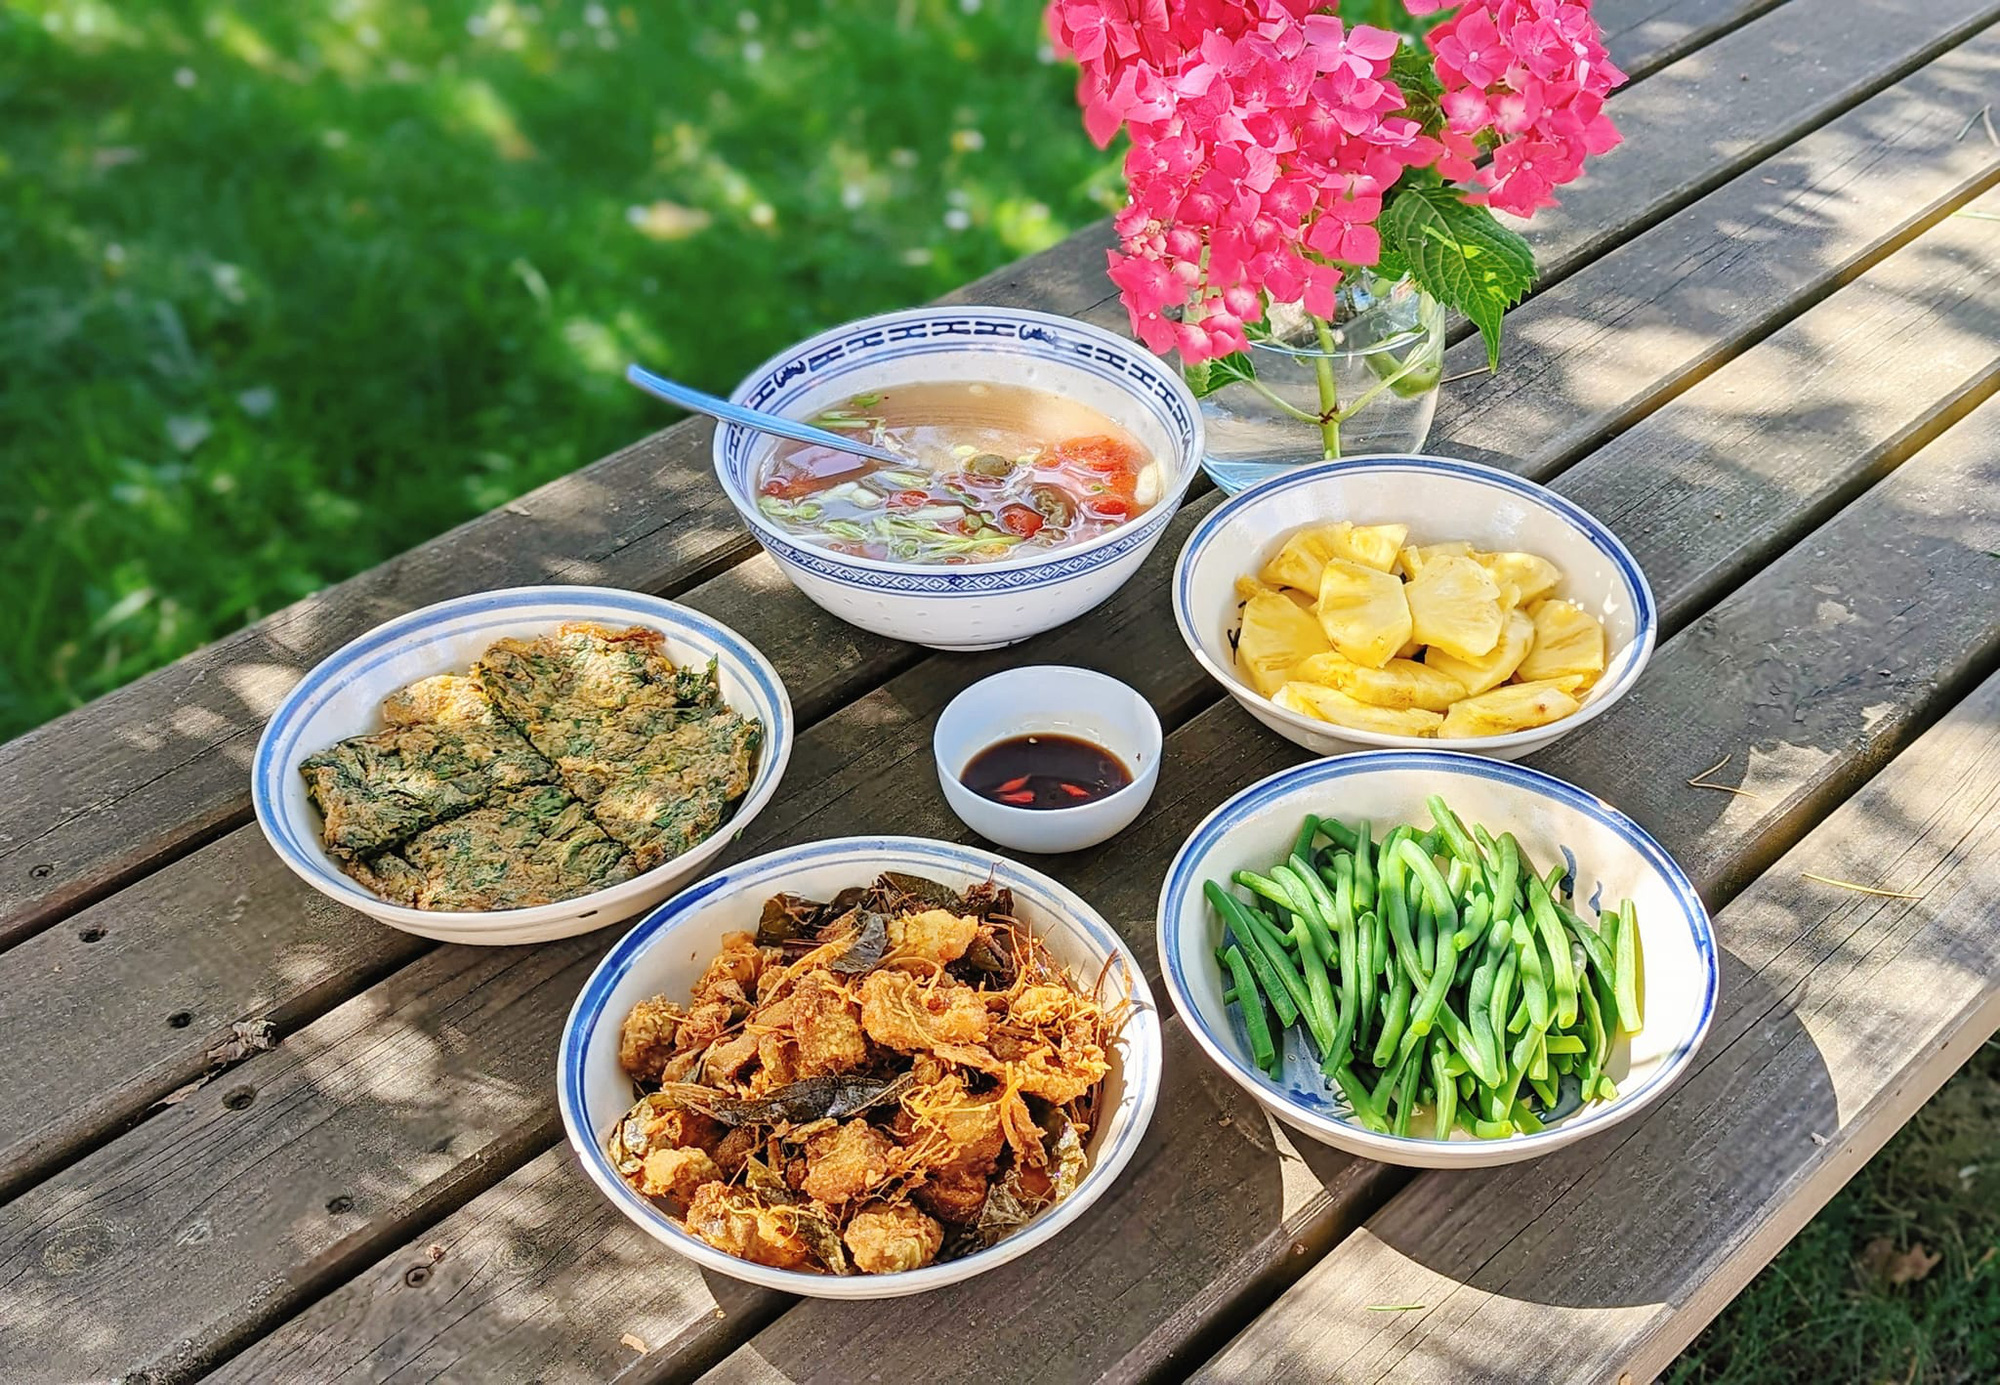 A meal containing fried eggs with mugwort, fried pork belly with galangal, fermented rice and clausena indica leaves, boiled home-grown green beans, and minced meat and dracontomelon fruit soup prepared by Do Thuy Linh in France. Photo: Supplied